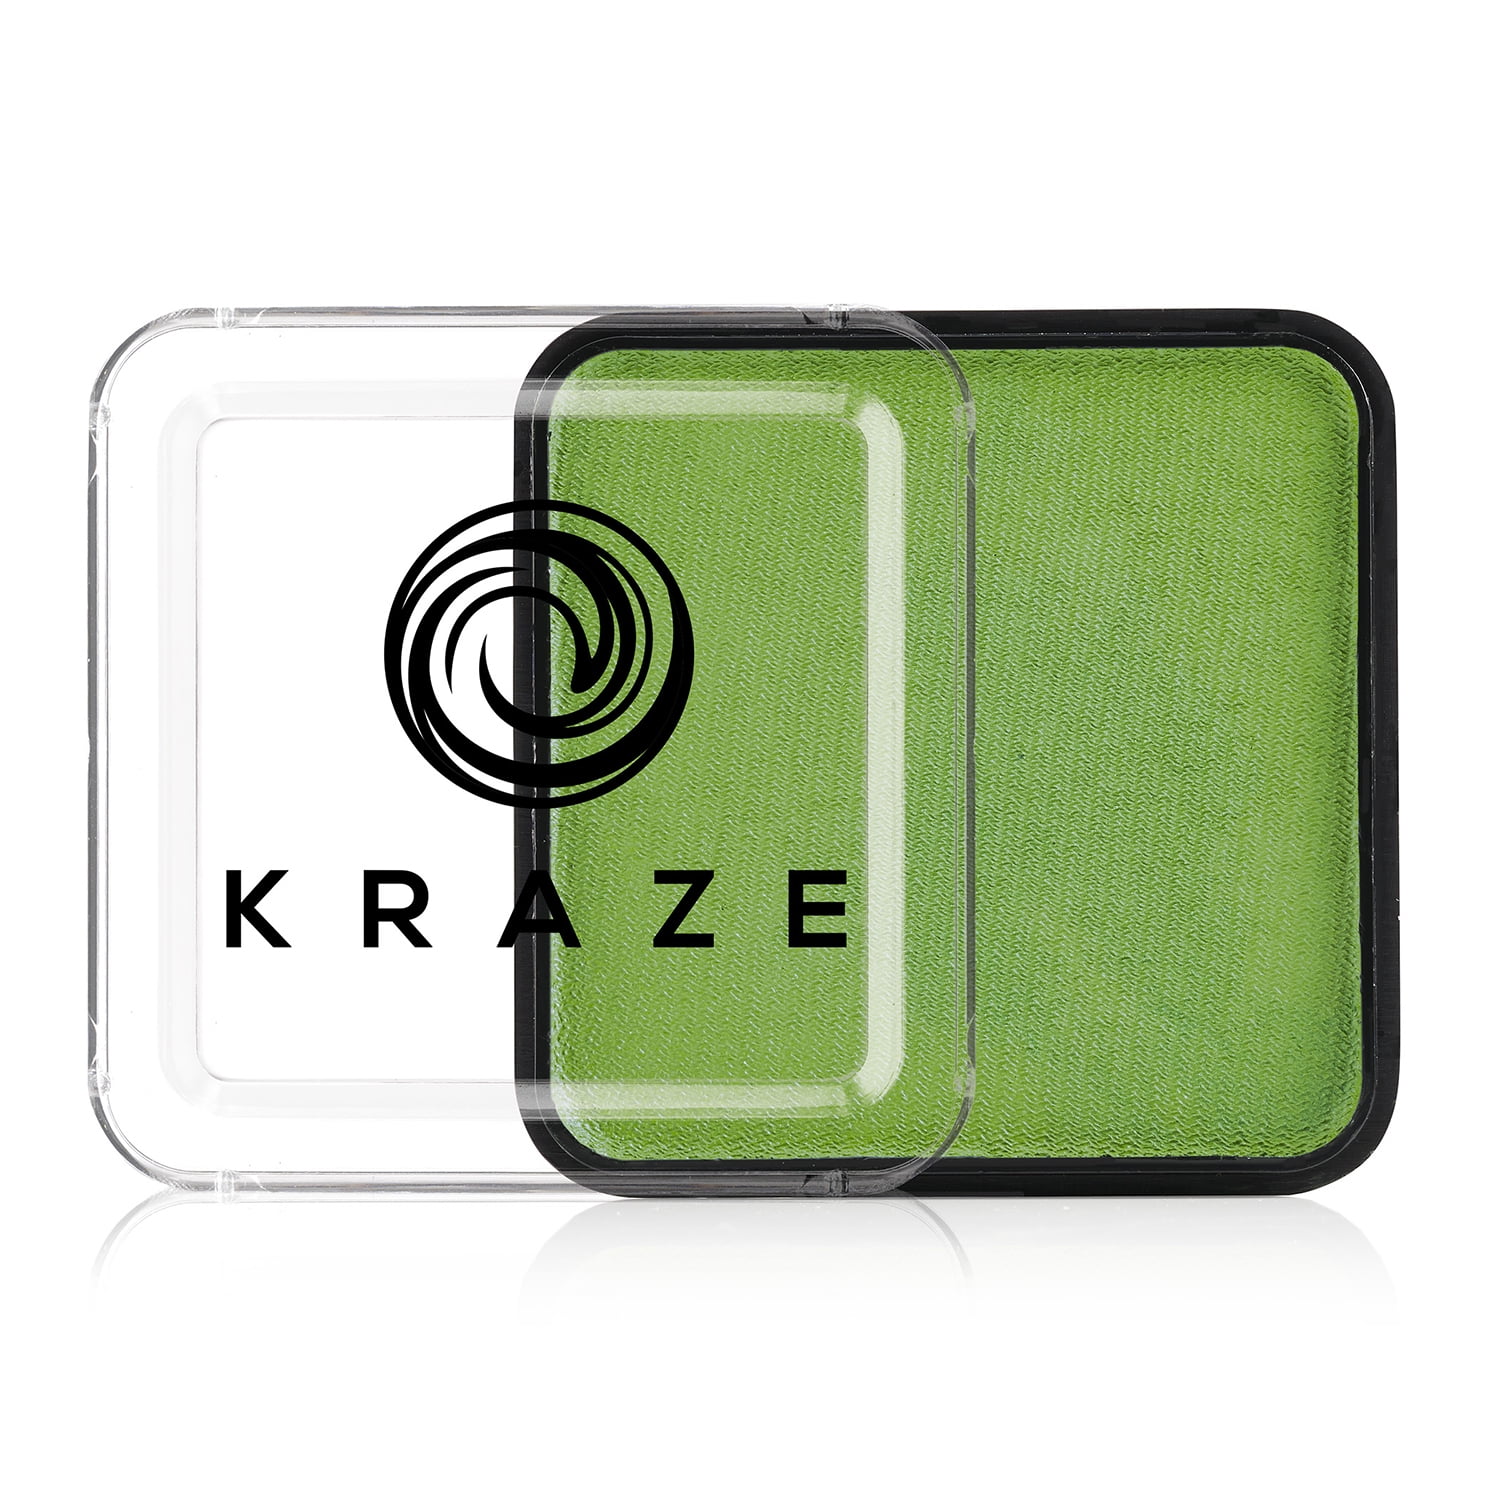 Kraze Square - Lime Green Face Paint (25 gm) - Hypoallergenic, Non-Toxic, Water Professional Face & Painting Makeup Supplies for Sensitive Skin, Kid Safe, Adults - Walmart.com